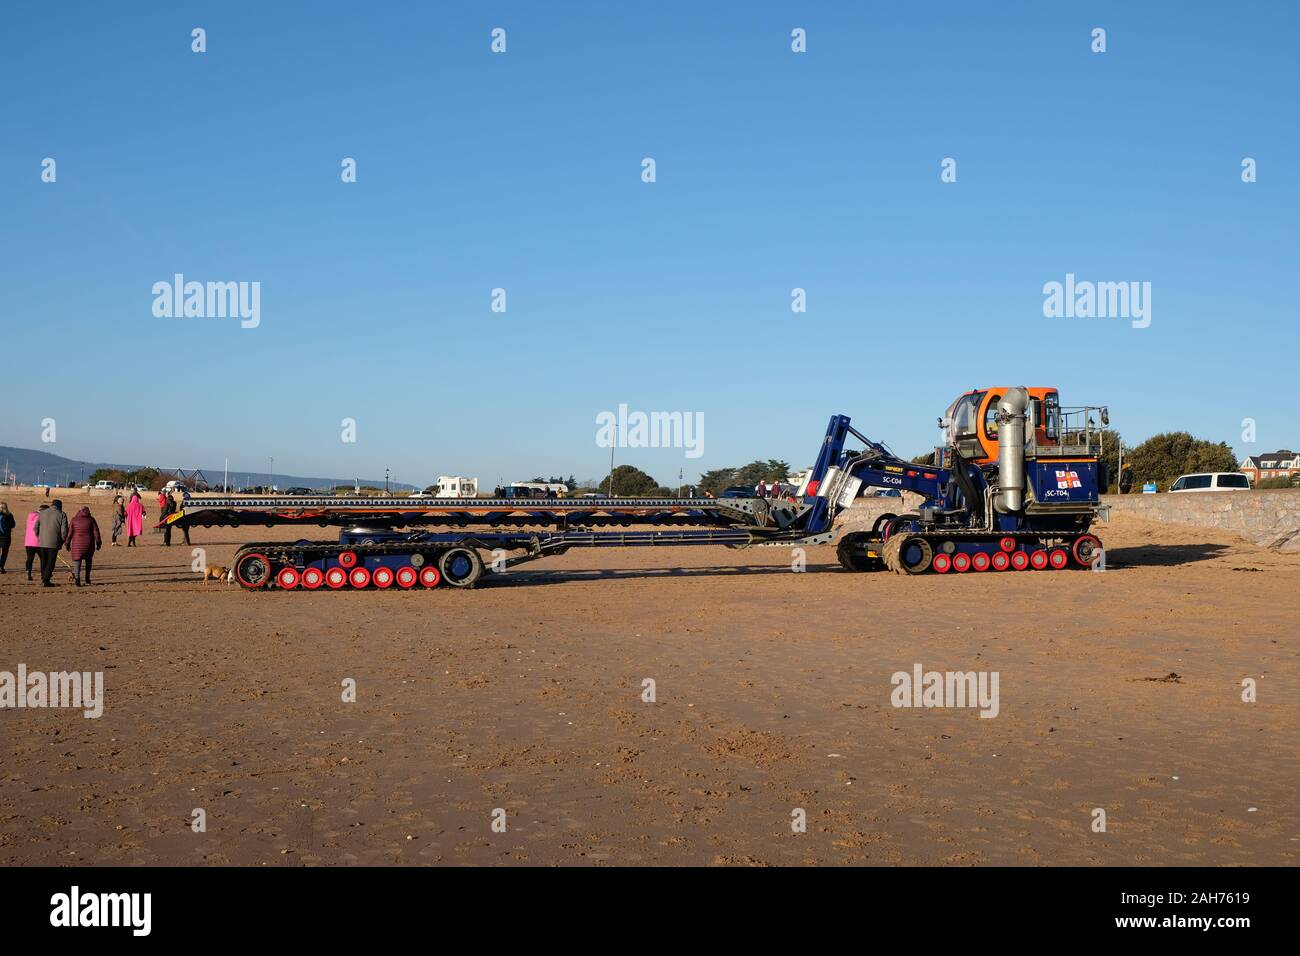 December 2019: The RNLI Supacat Tractor and Carriage waiting to haul Exmouth's Shannon-class lifeboat back to their lifeboat station at Exmouth beach Stock Photo